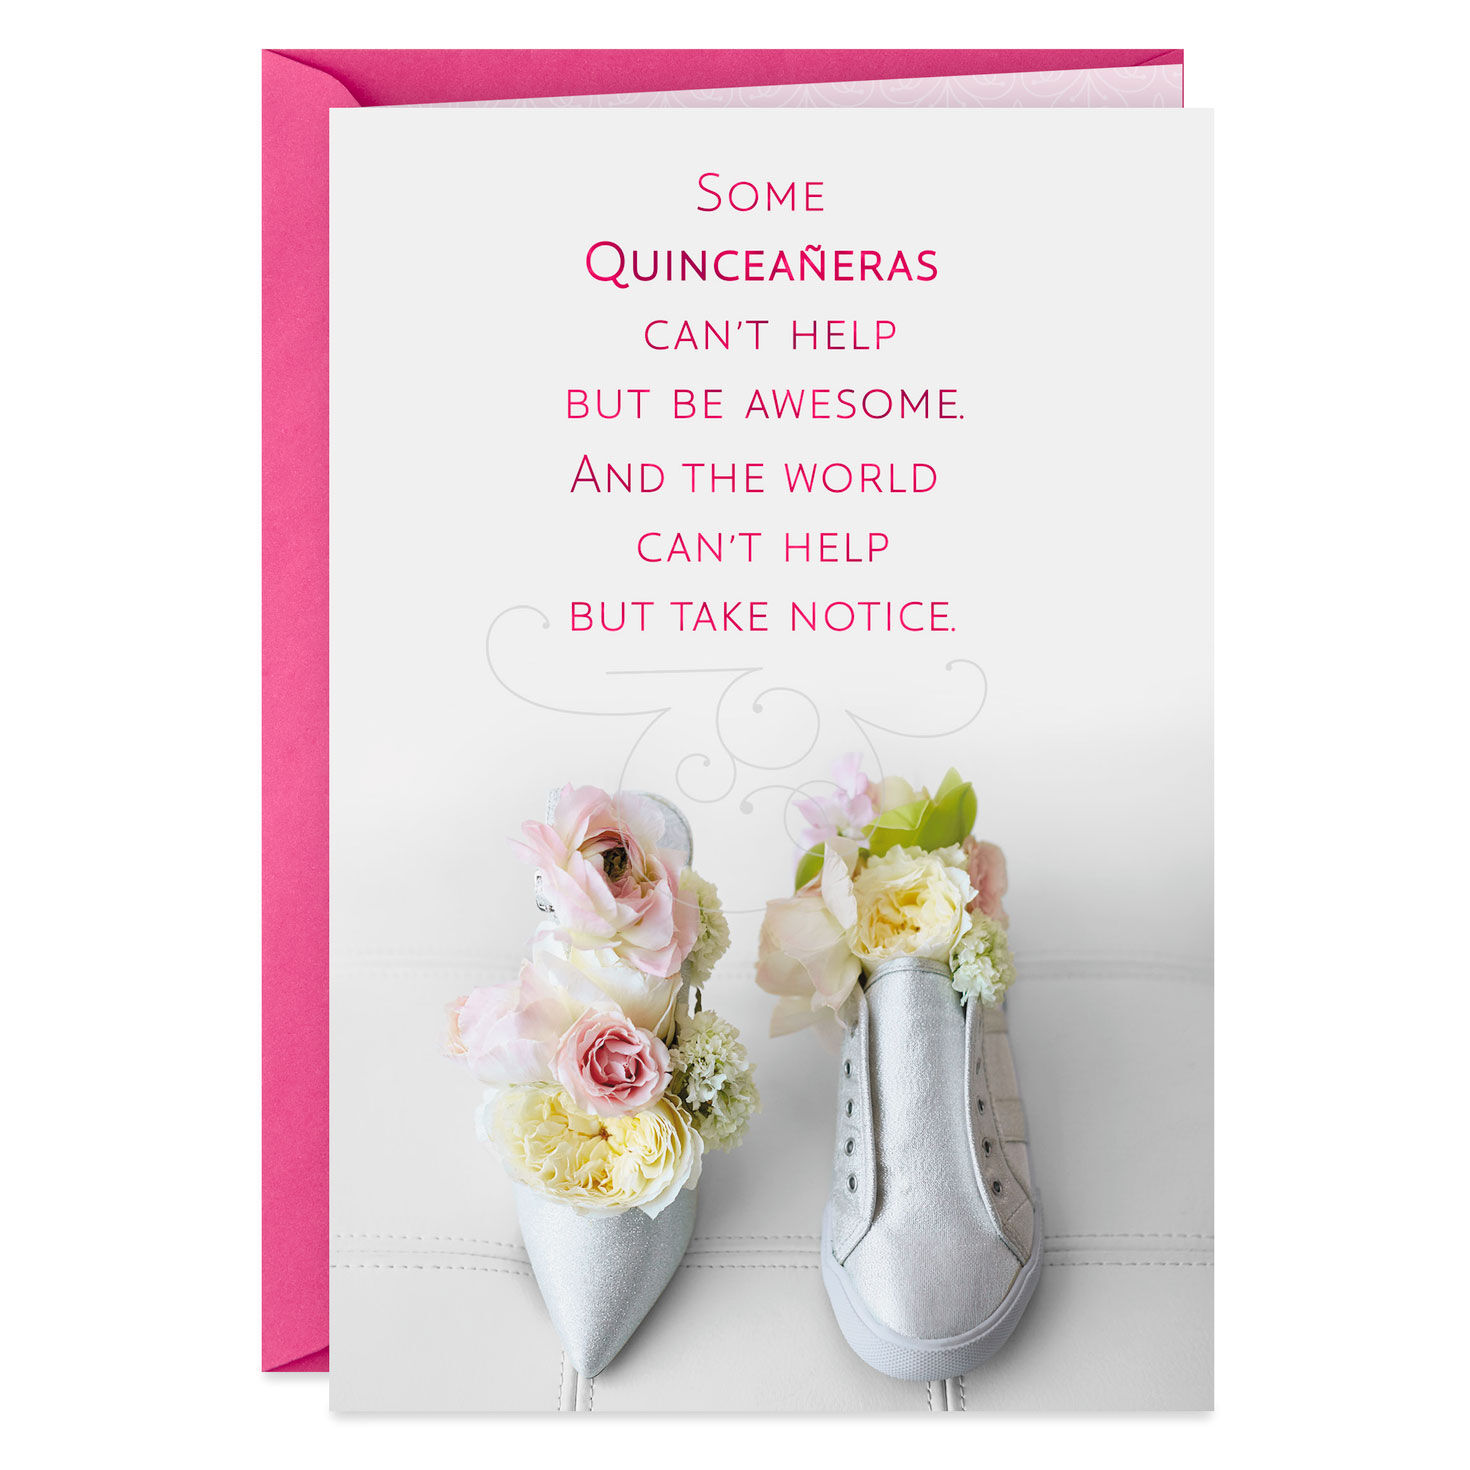 Quinceanera Happy Birthday Flower boots Printable 5x7 Folded Greeting Card,cowgirl Texas Birthday,Quince birthday,country girl 15 birthday